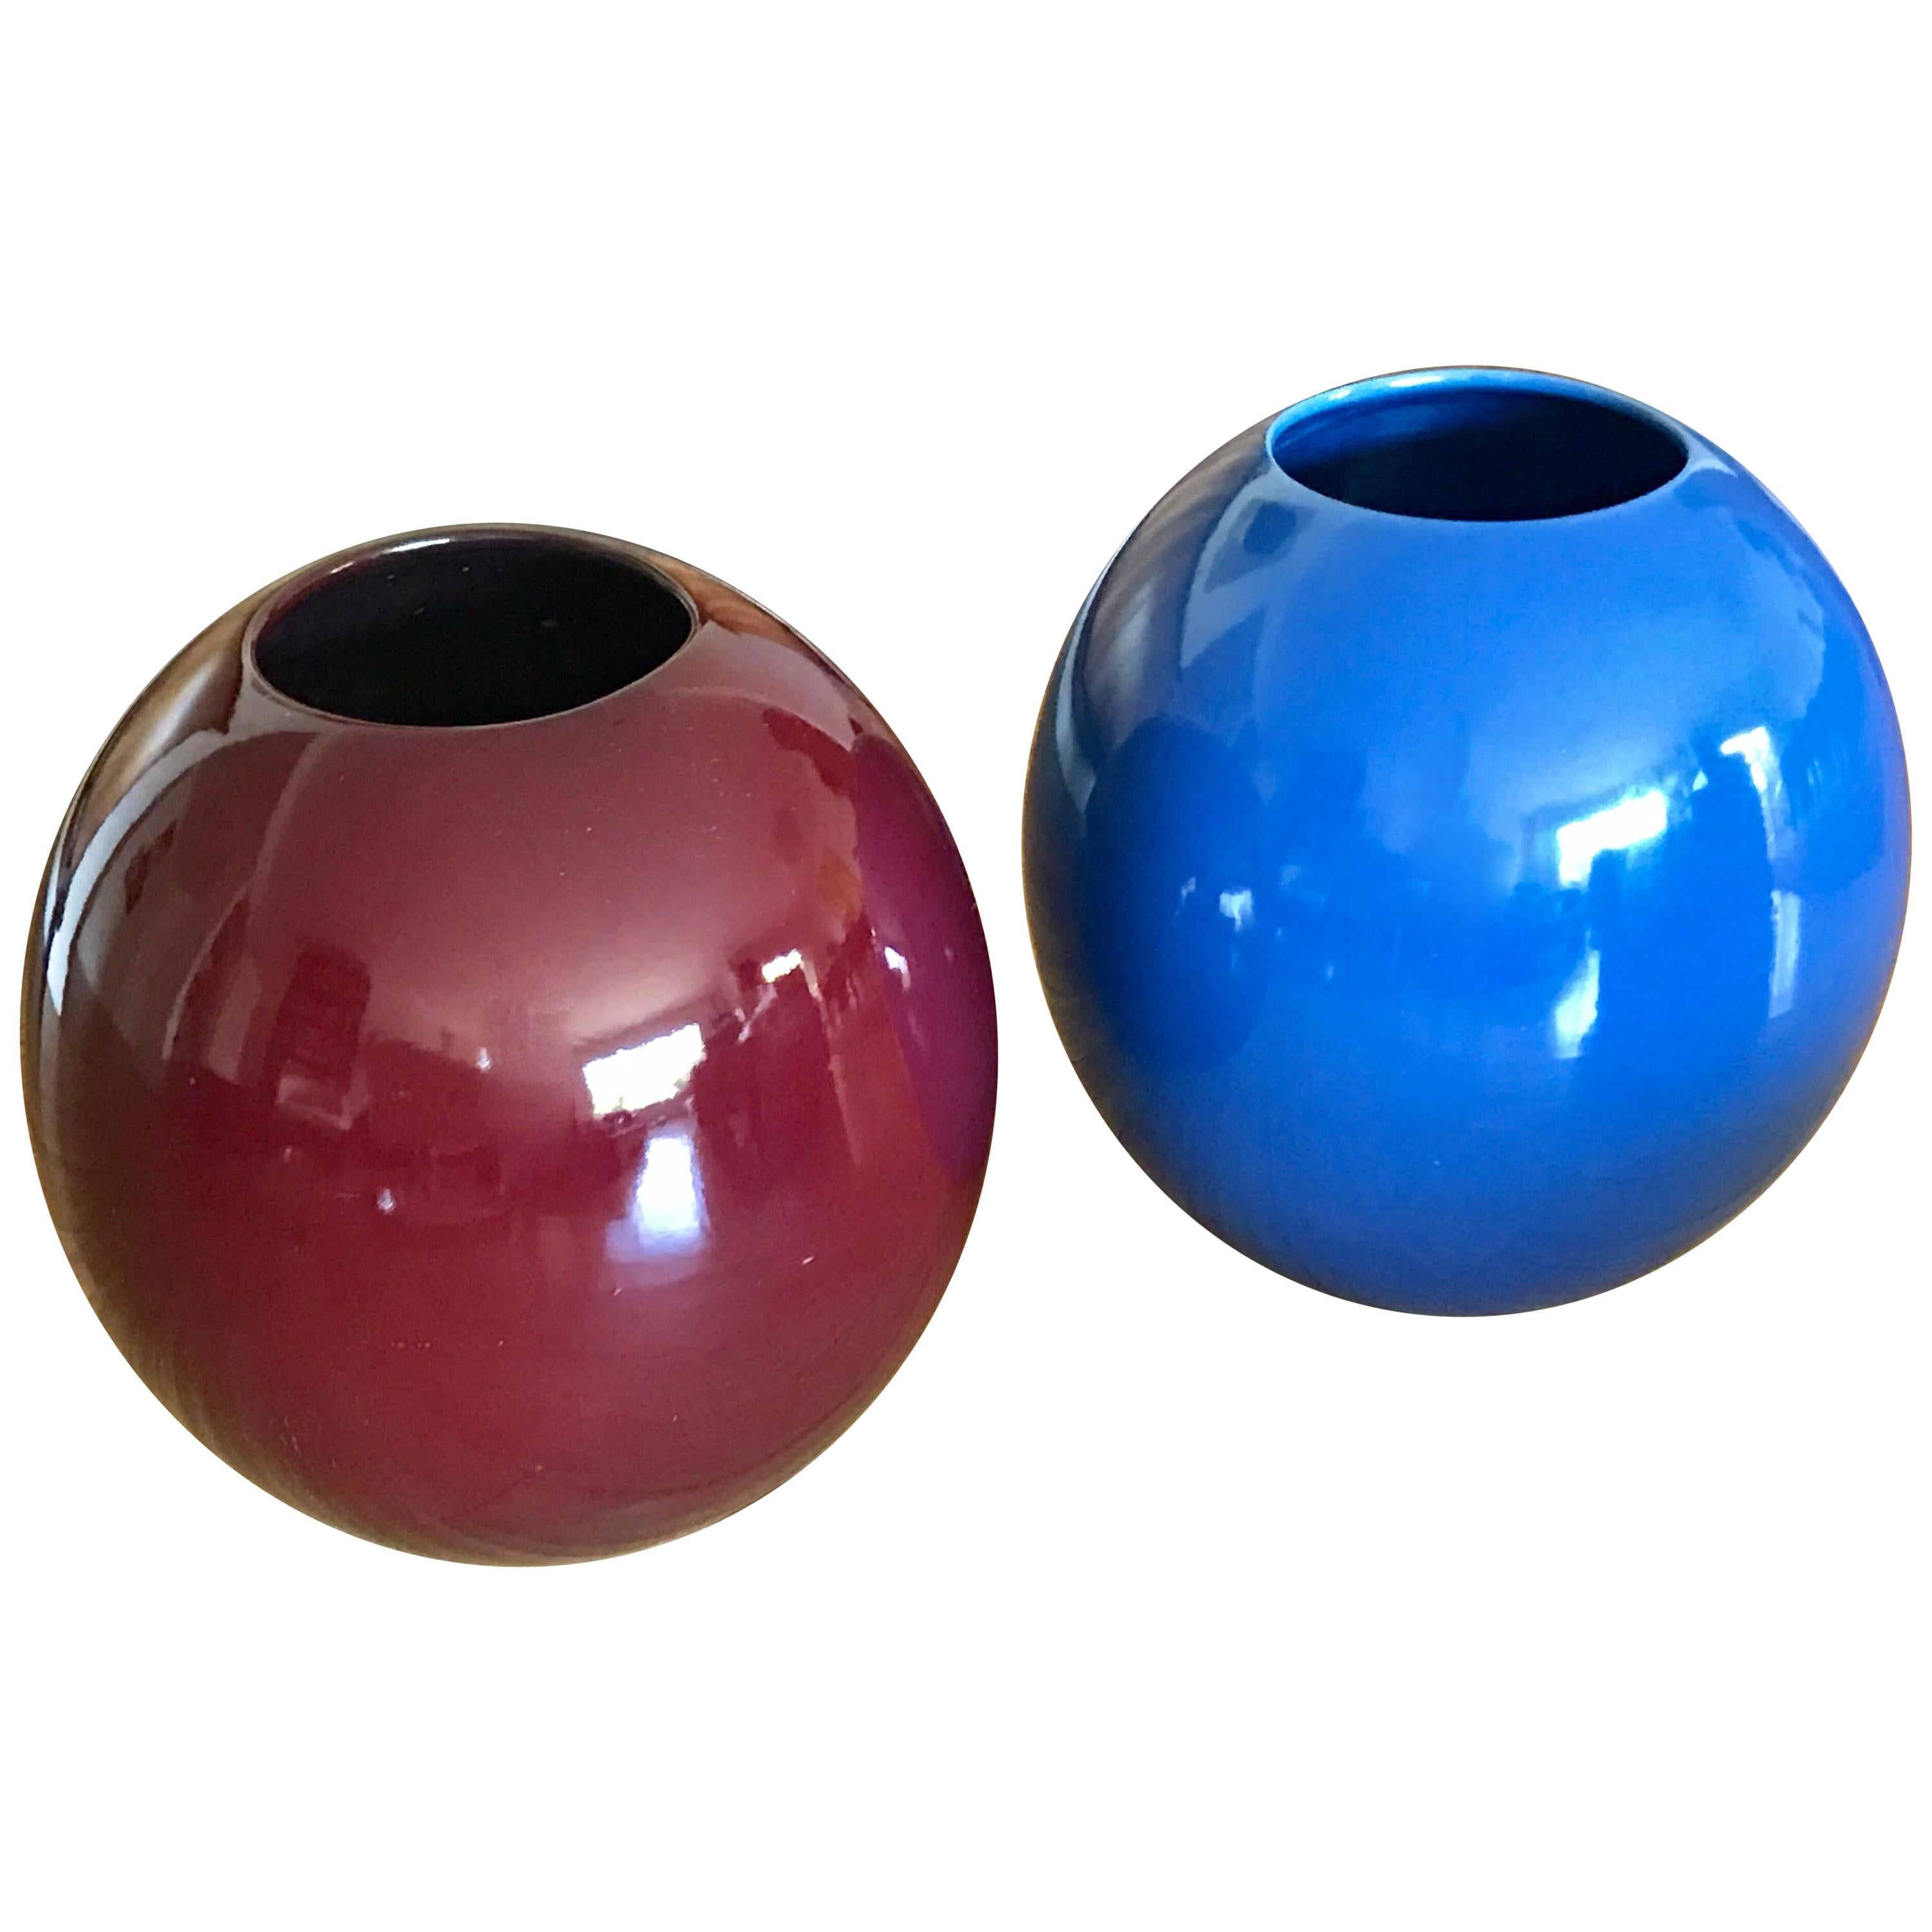 Architectural Pottery Spherical Vase Planters Marilyn Kay Austin 